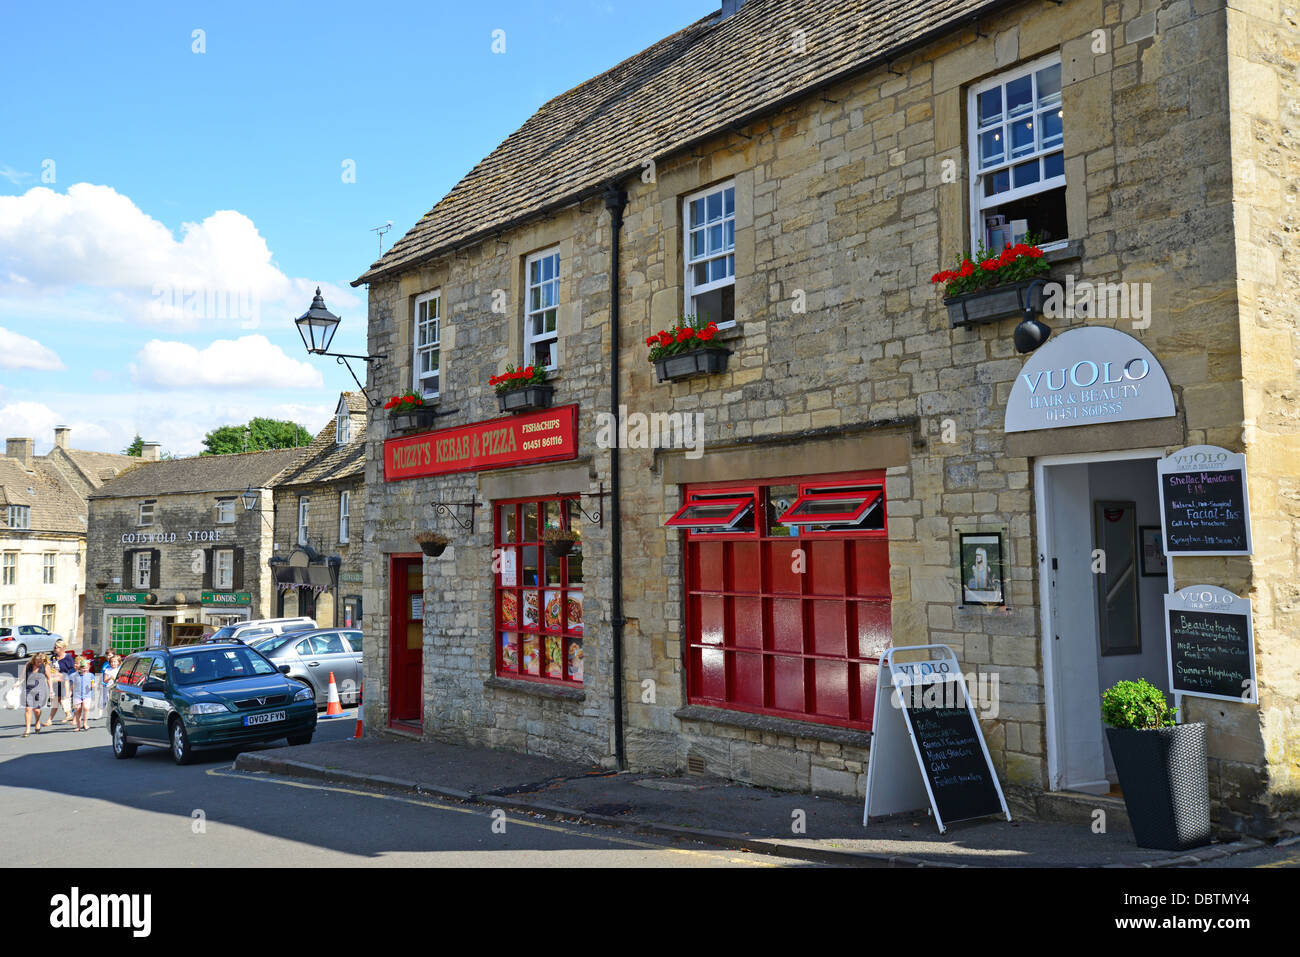 Cotswold stone buildings in Market Place, Northleach, Cotswolds, Gloucestershire, England, United Kingdom Stock Photo